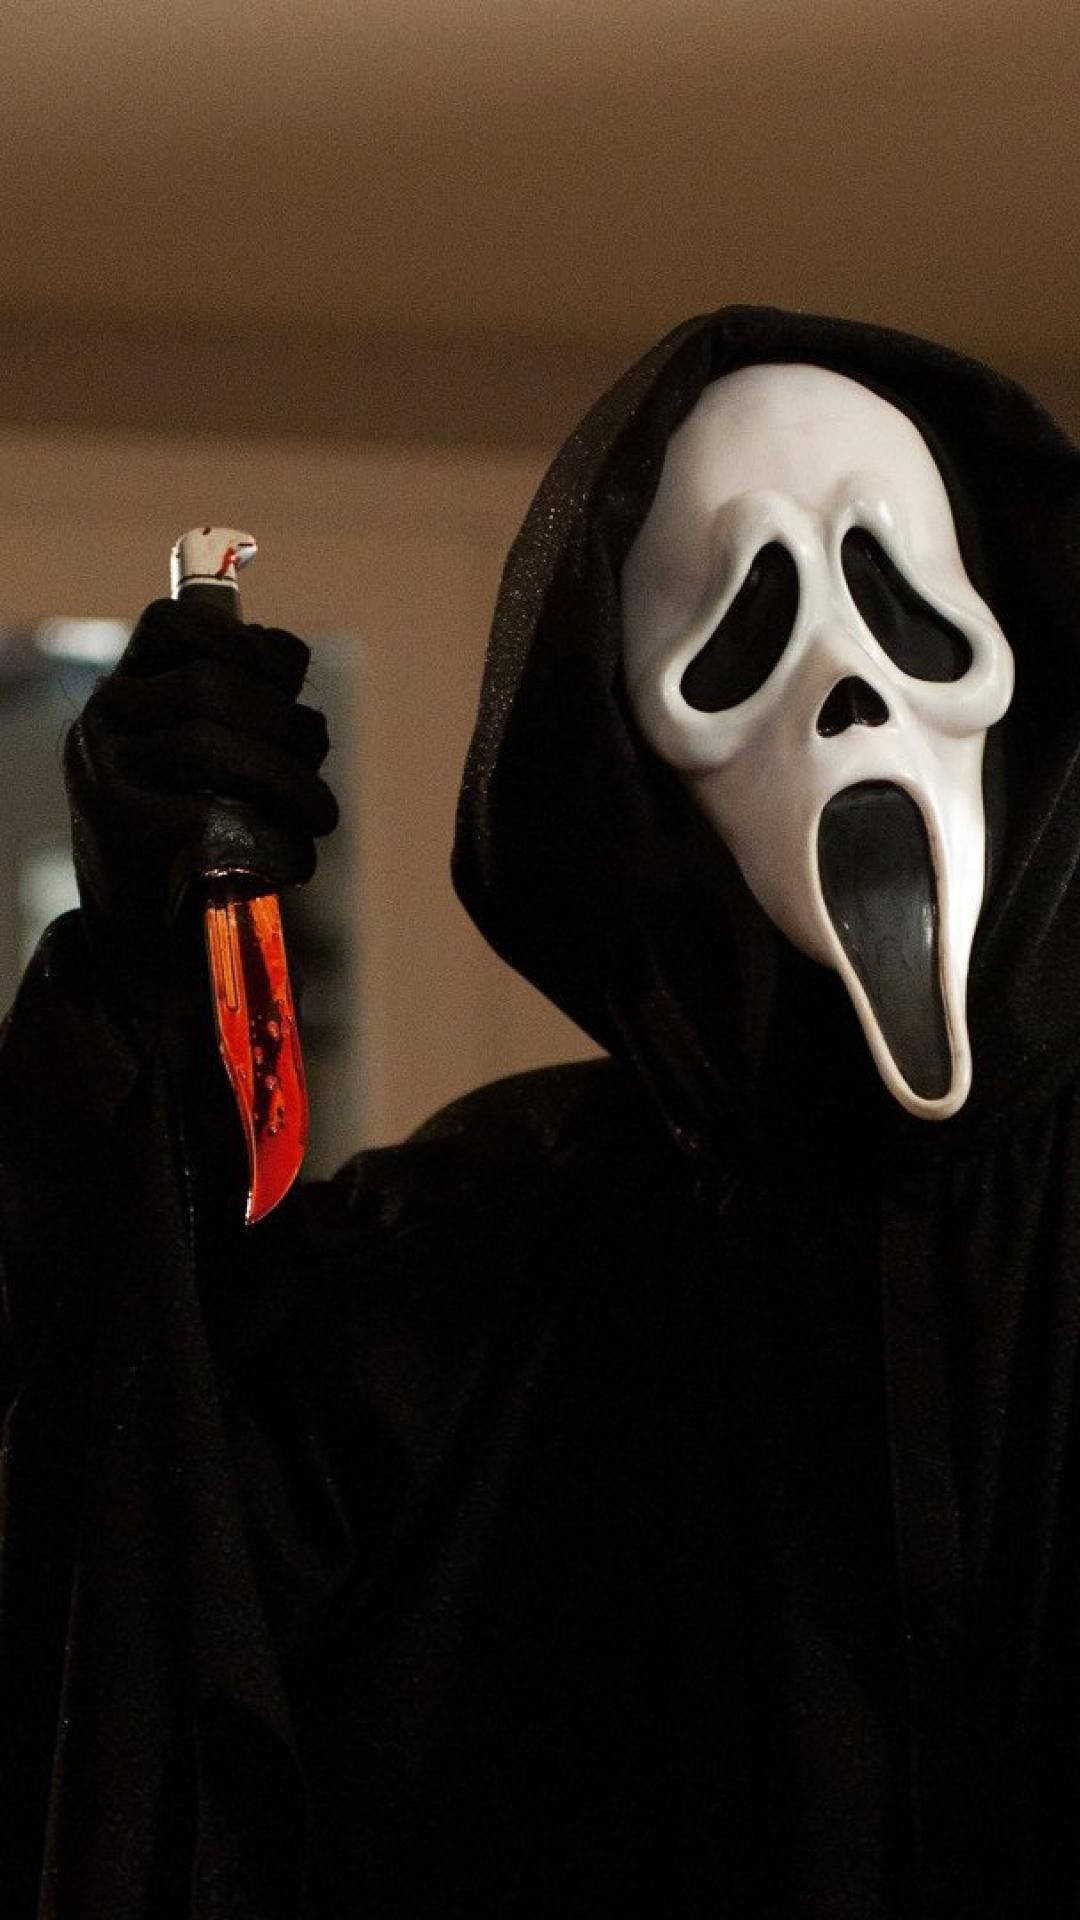 Tension Rises - A Mystery beneath the Ghostface Mask in Scream Wallpaper